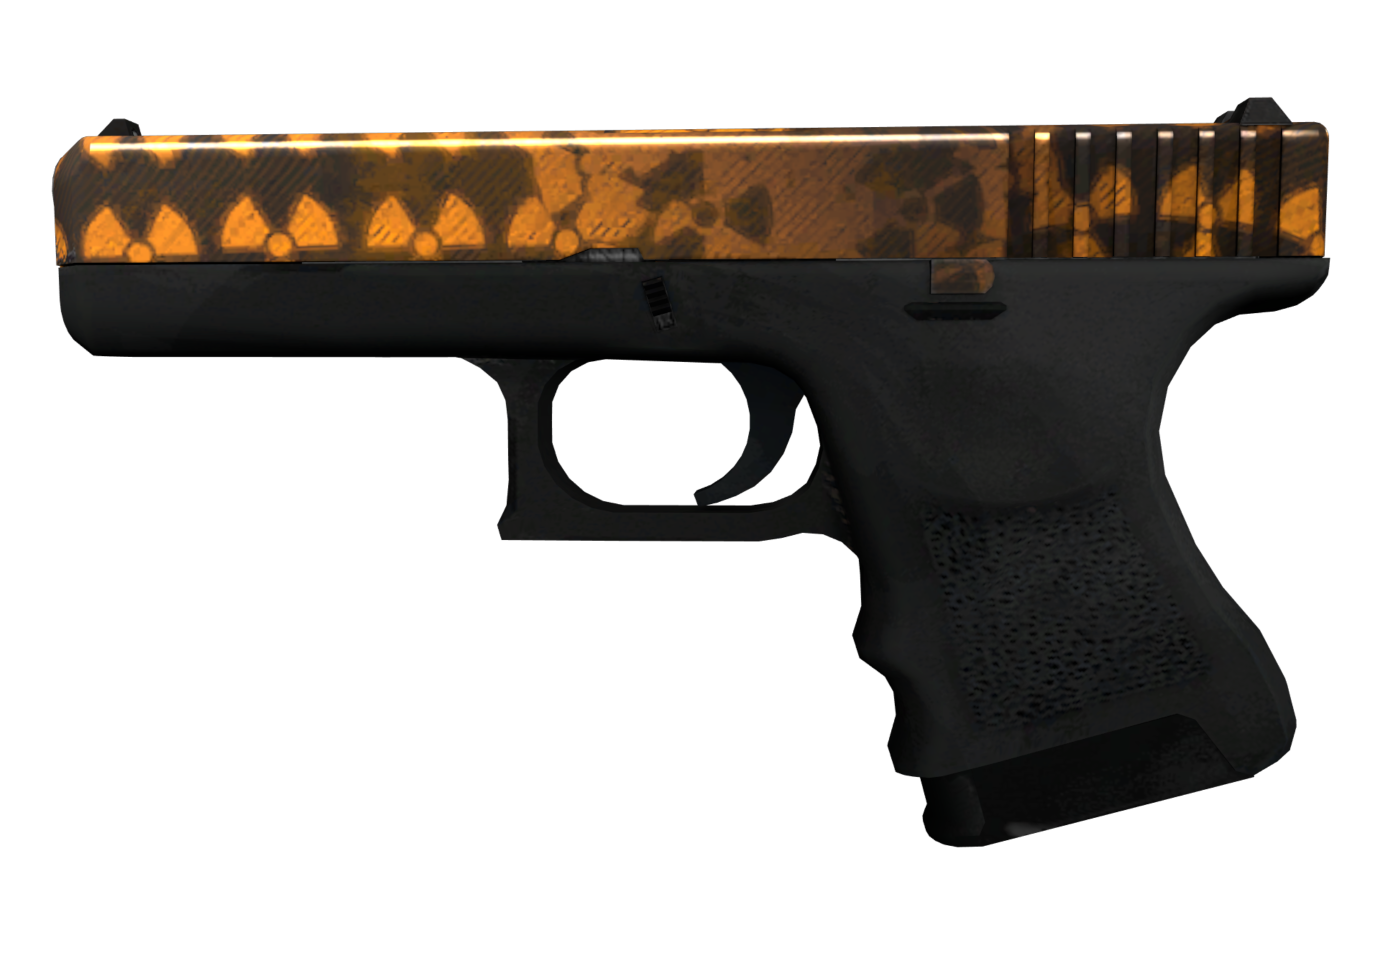 Counter-Strike: Global Offensive Useful Tricks + Recoil Pattern for Glock Reactor CSGO - Teeth playside only - 22F605D